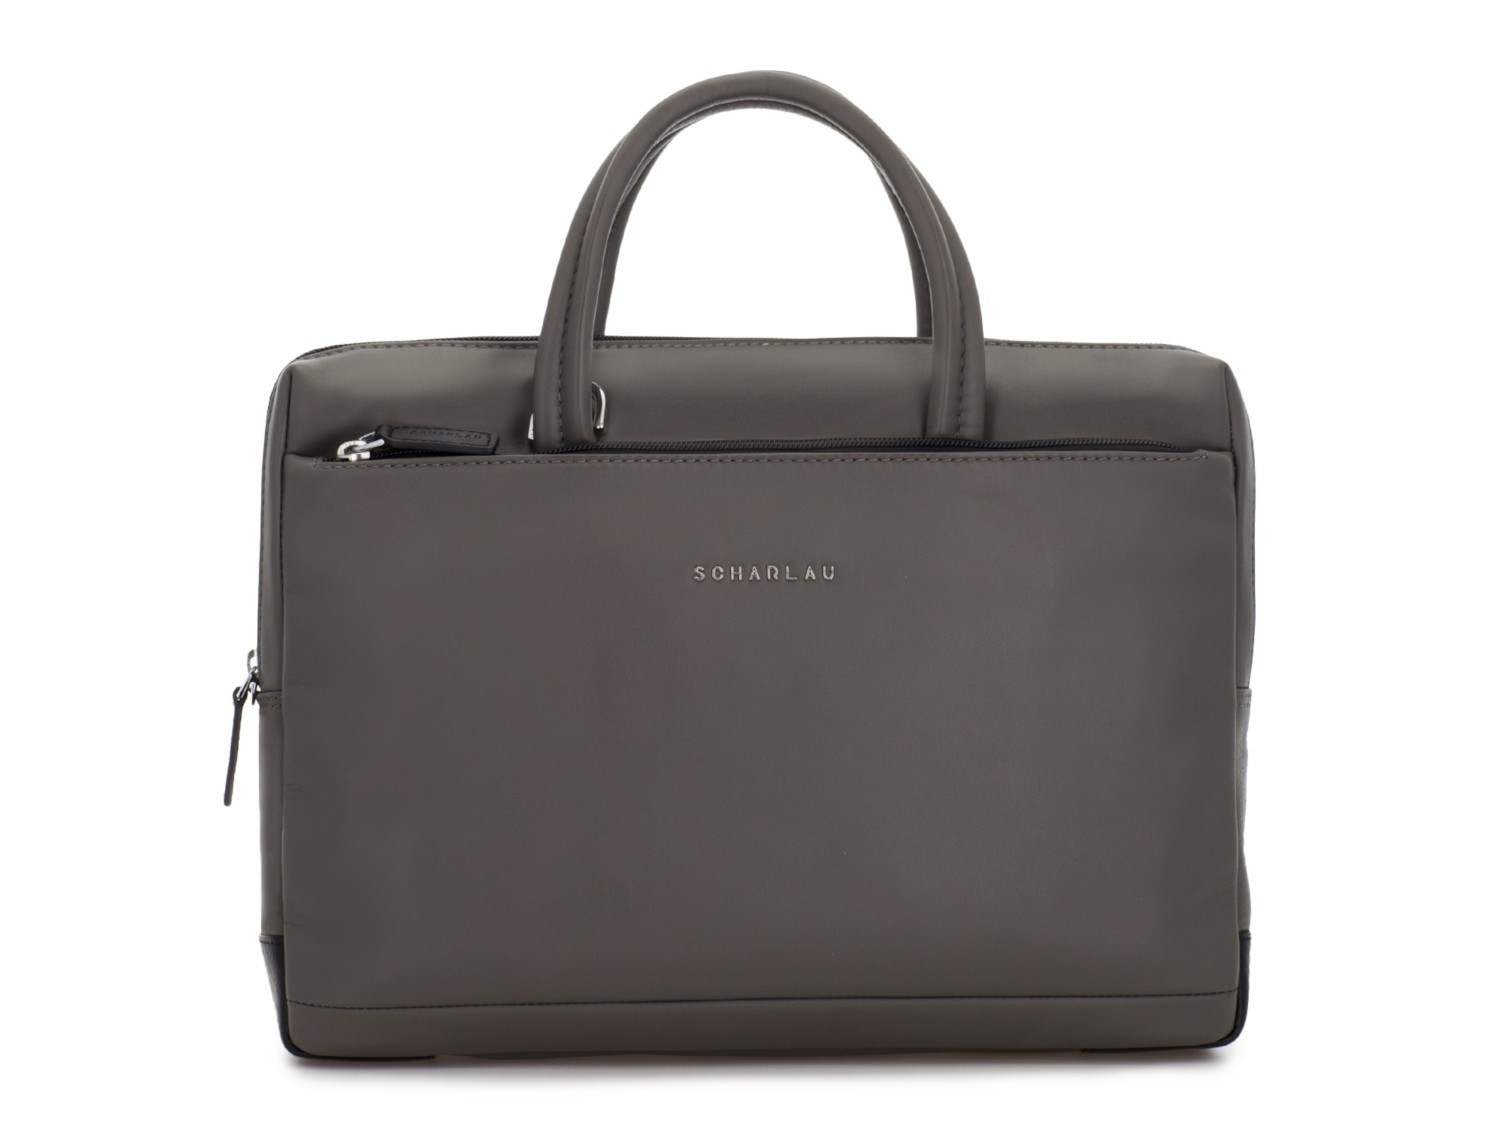 leather small business bag gray front